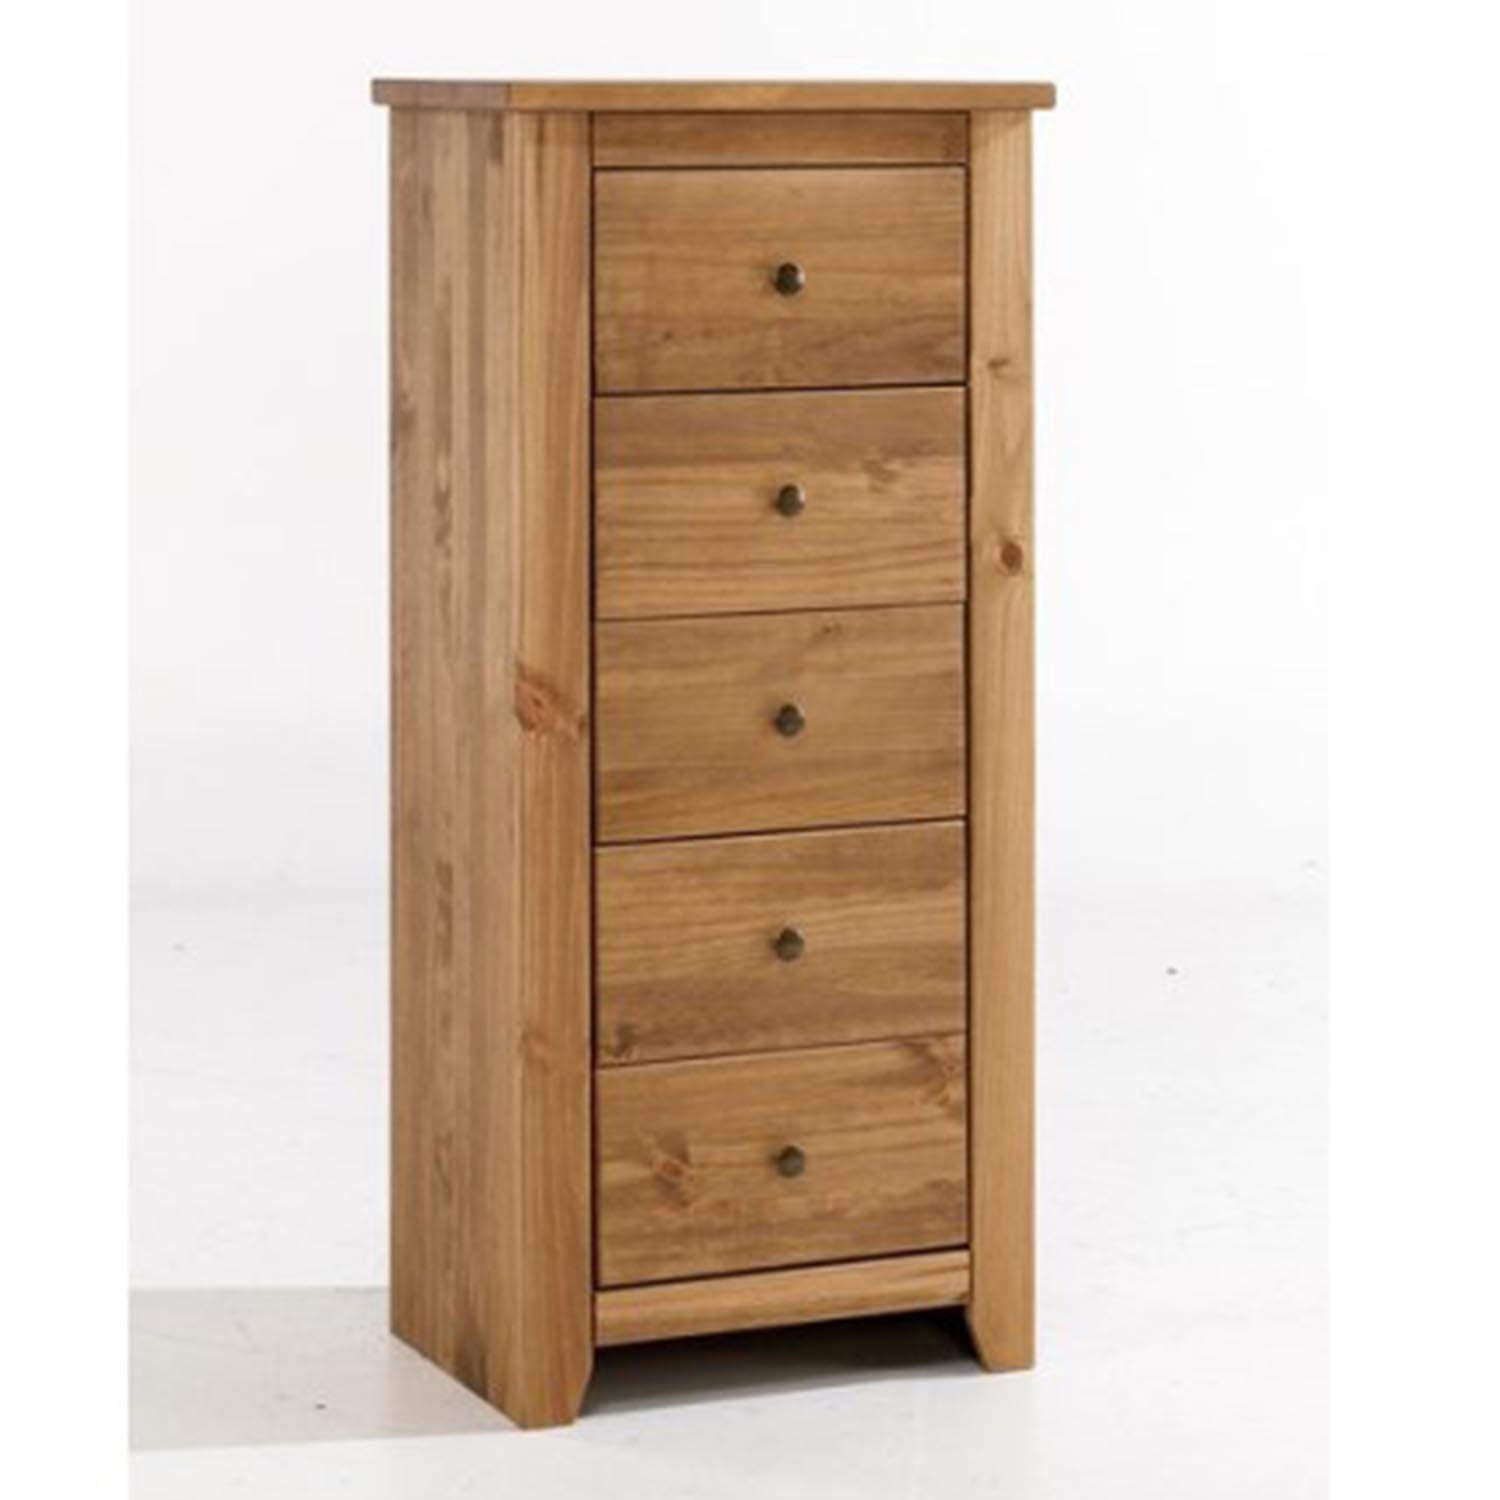 Photo of Solid pine tallboy chest of drawers - havana - lpd